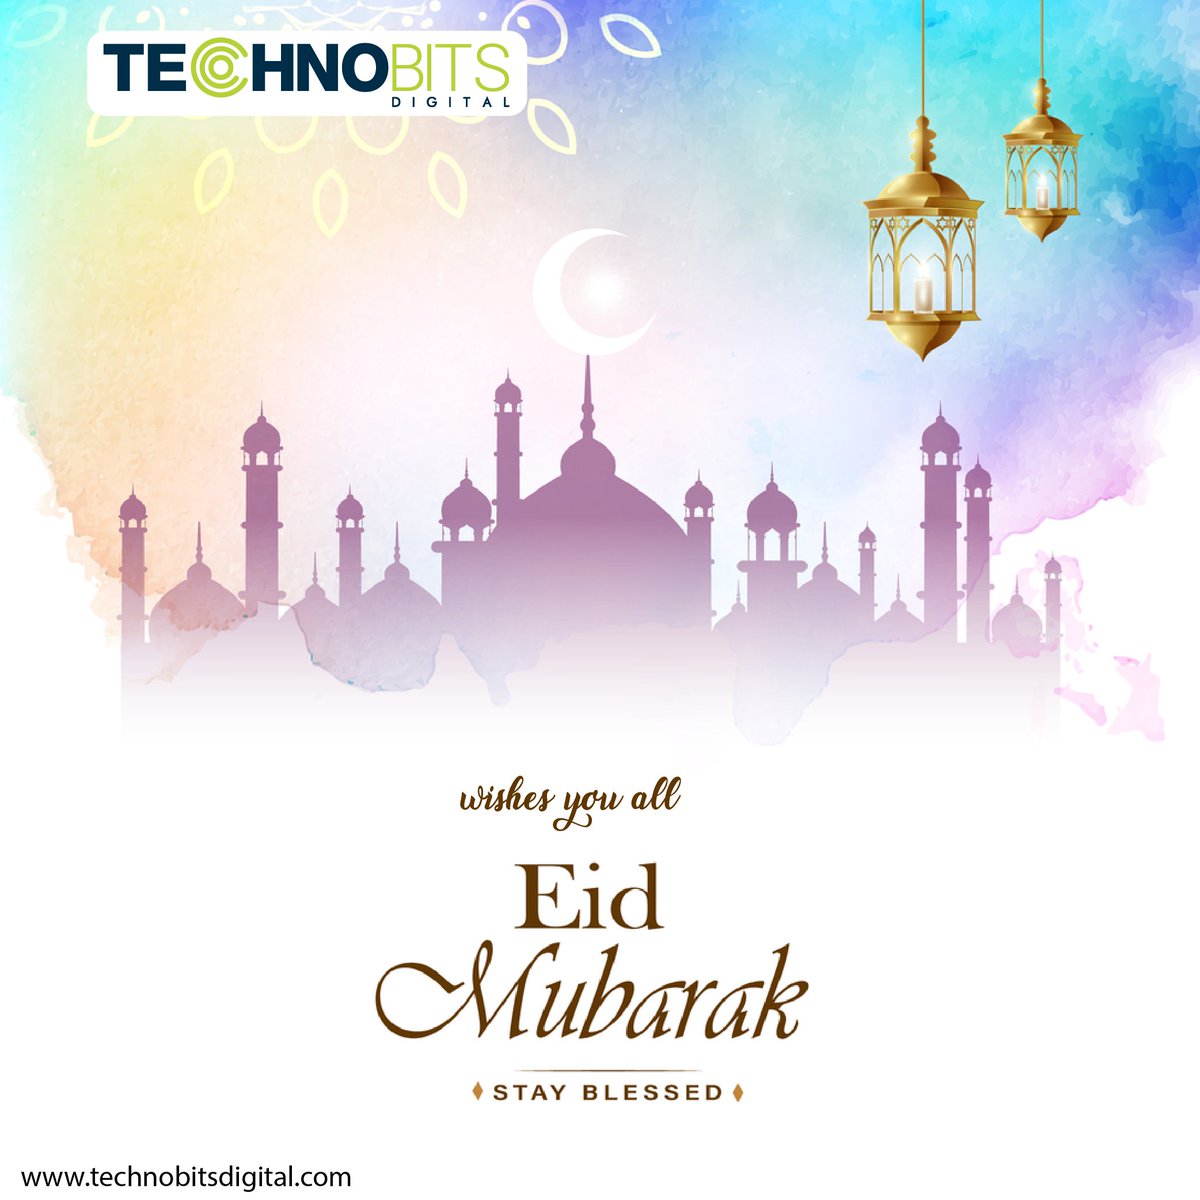 Eid Mubarak! 🌙✨ May your day be filled with love, joy, and peace. Wishing everyone a blessed Eid from Technobits Digital. Let's spread kindness and cheer! 
.
.
#EidMubarak #SpreadJoy #LoveAndPeace #CelebratingEid #EidVibes 🌙🕋🕌✨💕